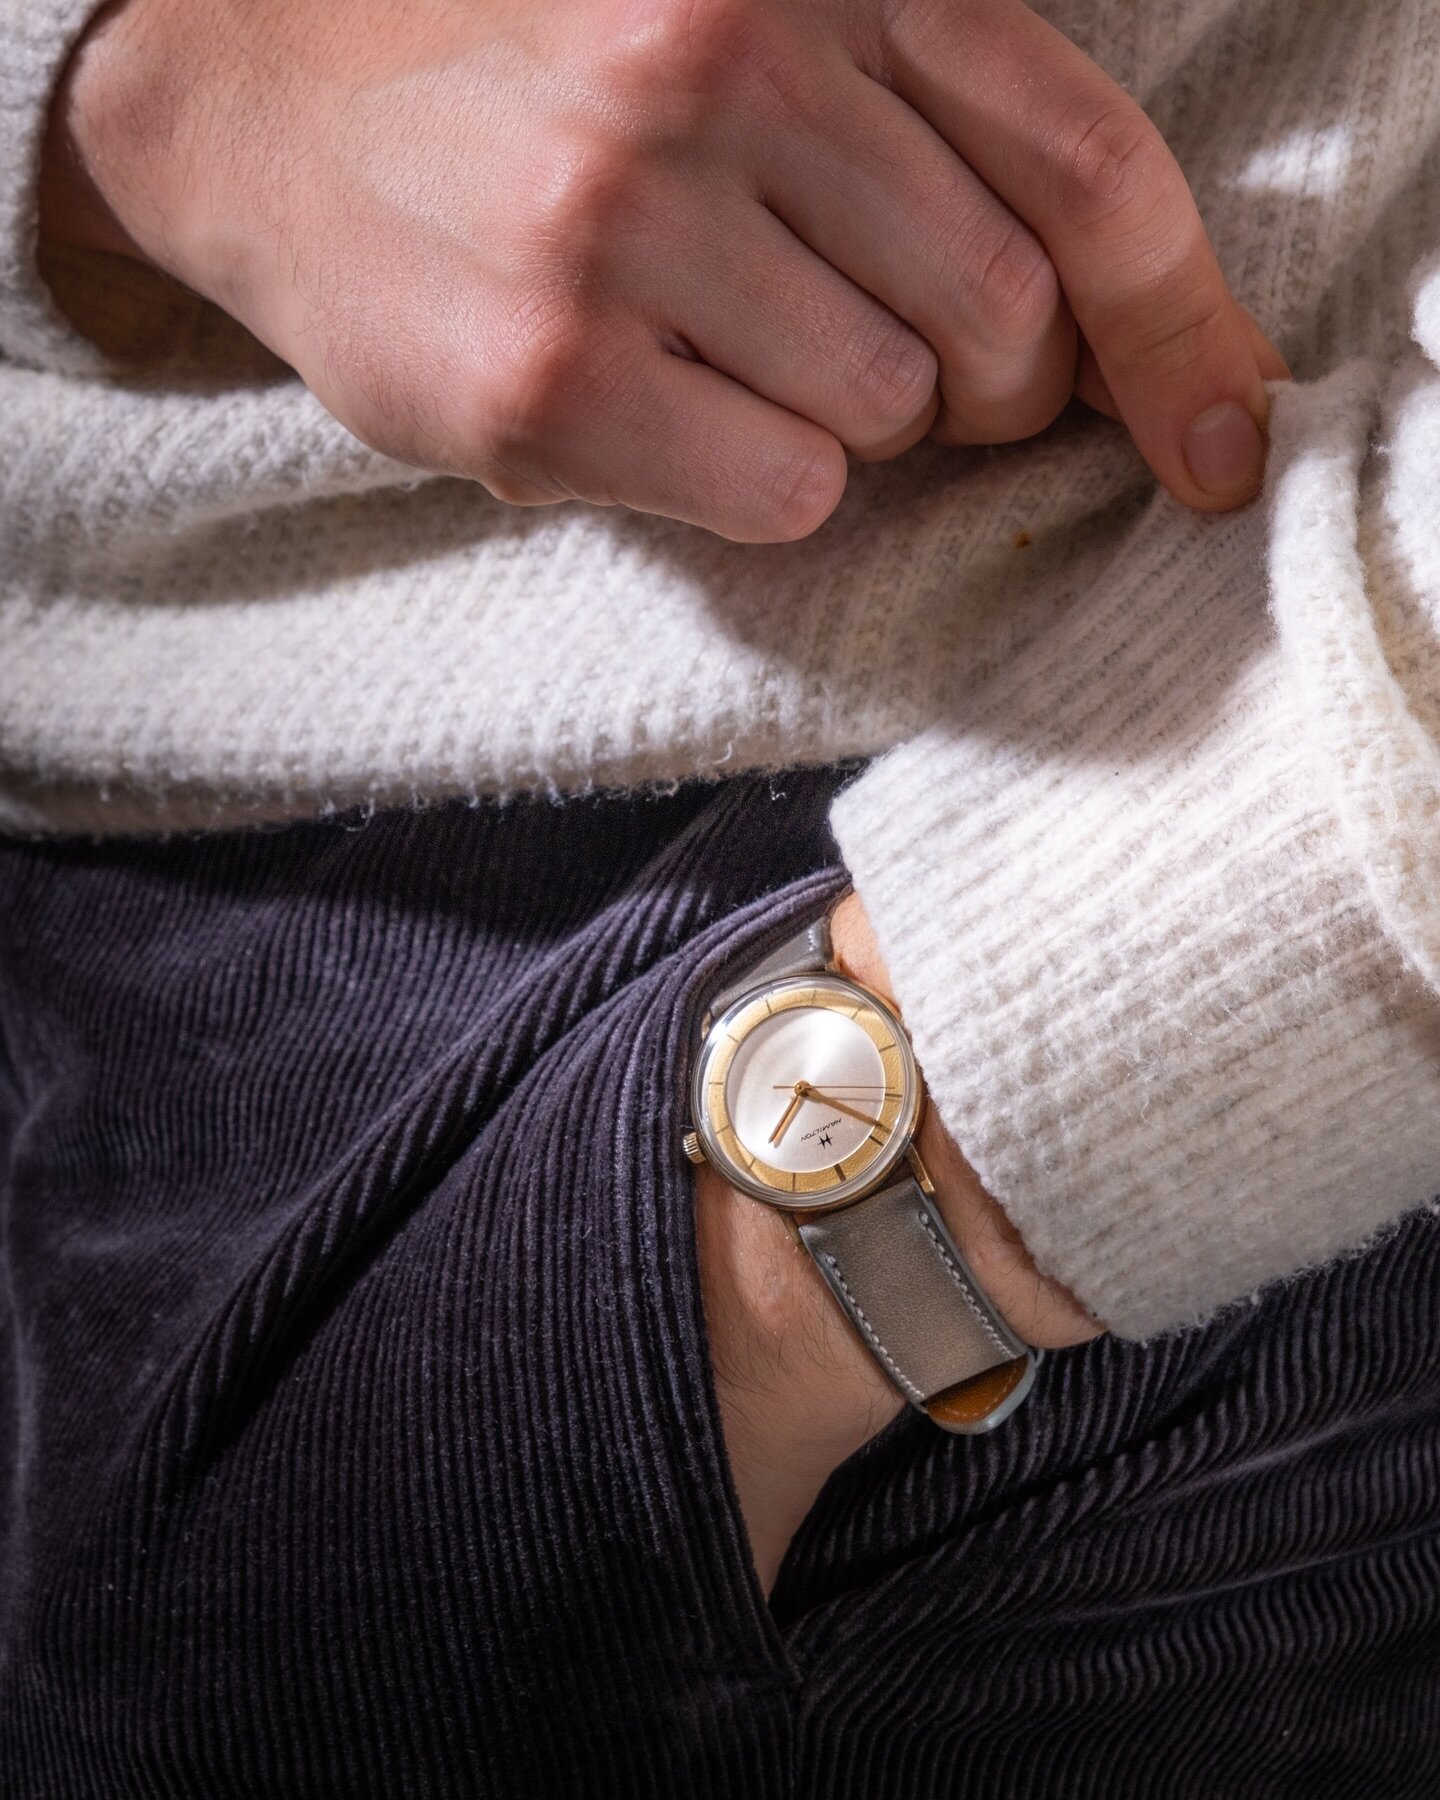 Given its -5C out, it&rsquo;s time to crack out the knitts. This watch is stunning btw and a dream to wear.